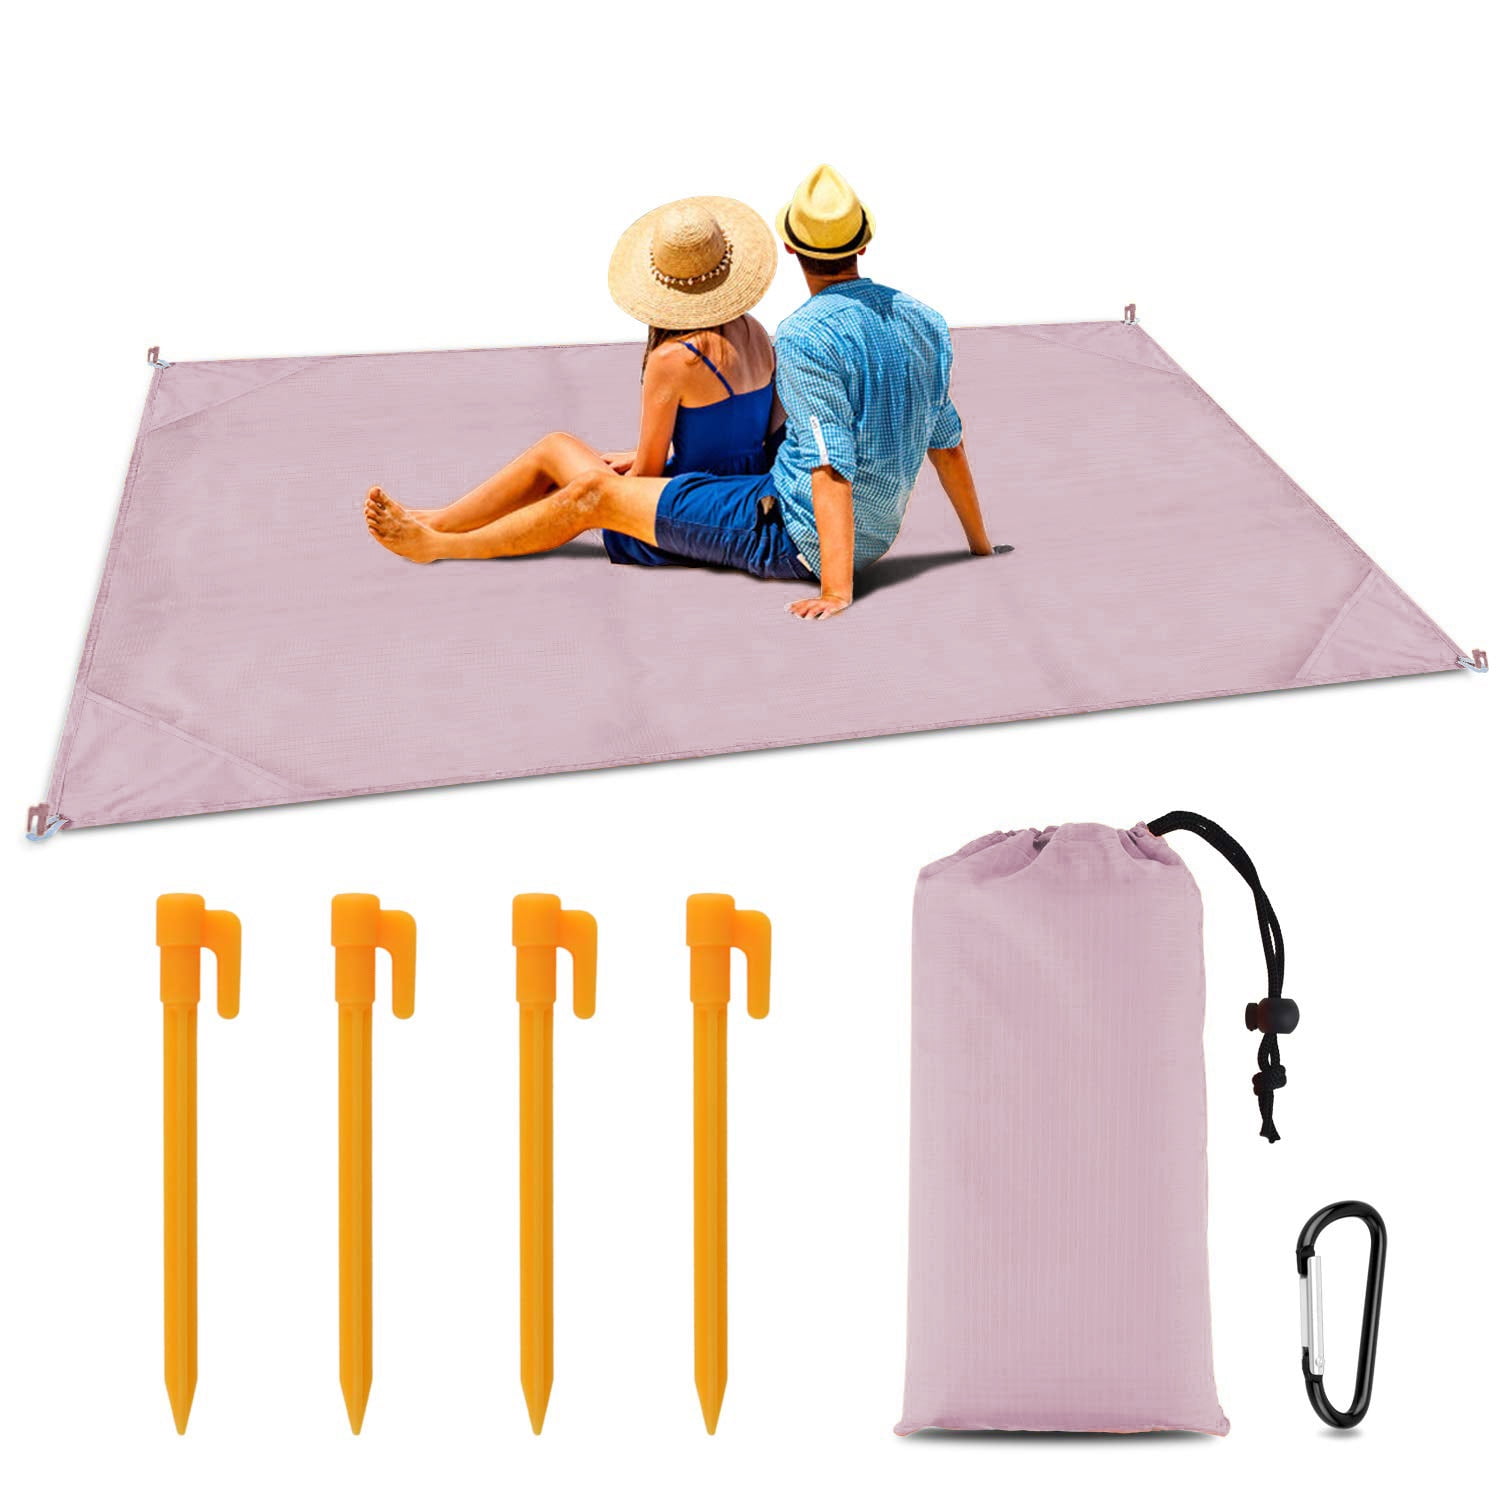 Sand and Waterproof for Outdoor Travel Compact Beach Mat for Camping Durable Nylon Design Foldable Pocket Blanket Metal Stakes Included Picnic or Festival Use Hiking